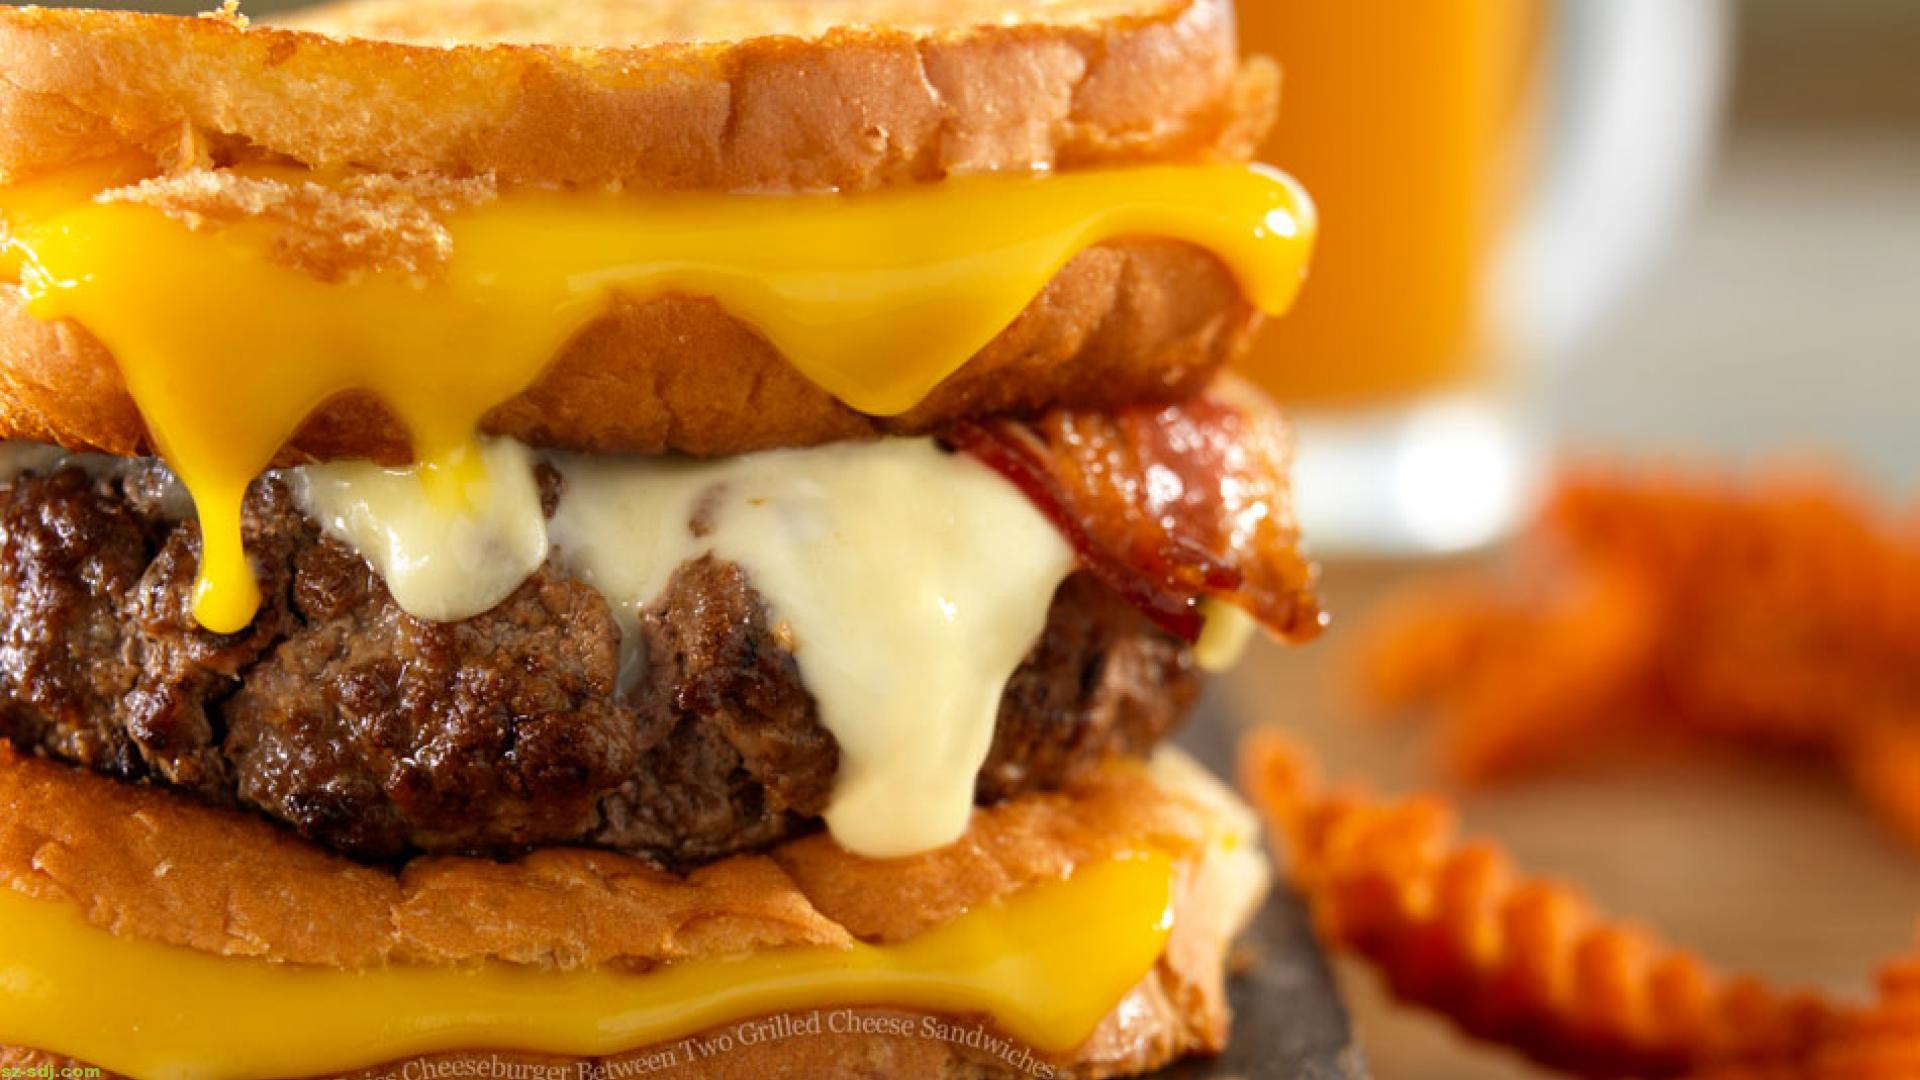 Cheese-Burger-Image-Like-Delicious-Wallpaper-Background-1080p